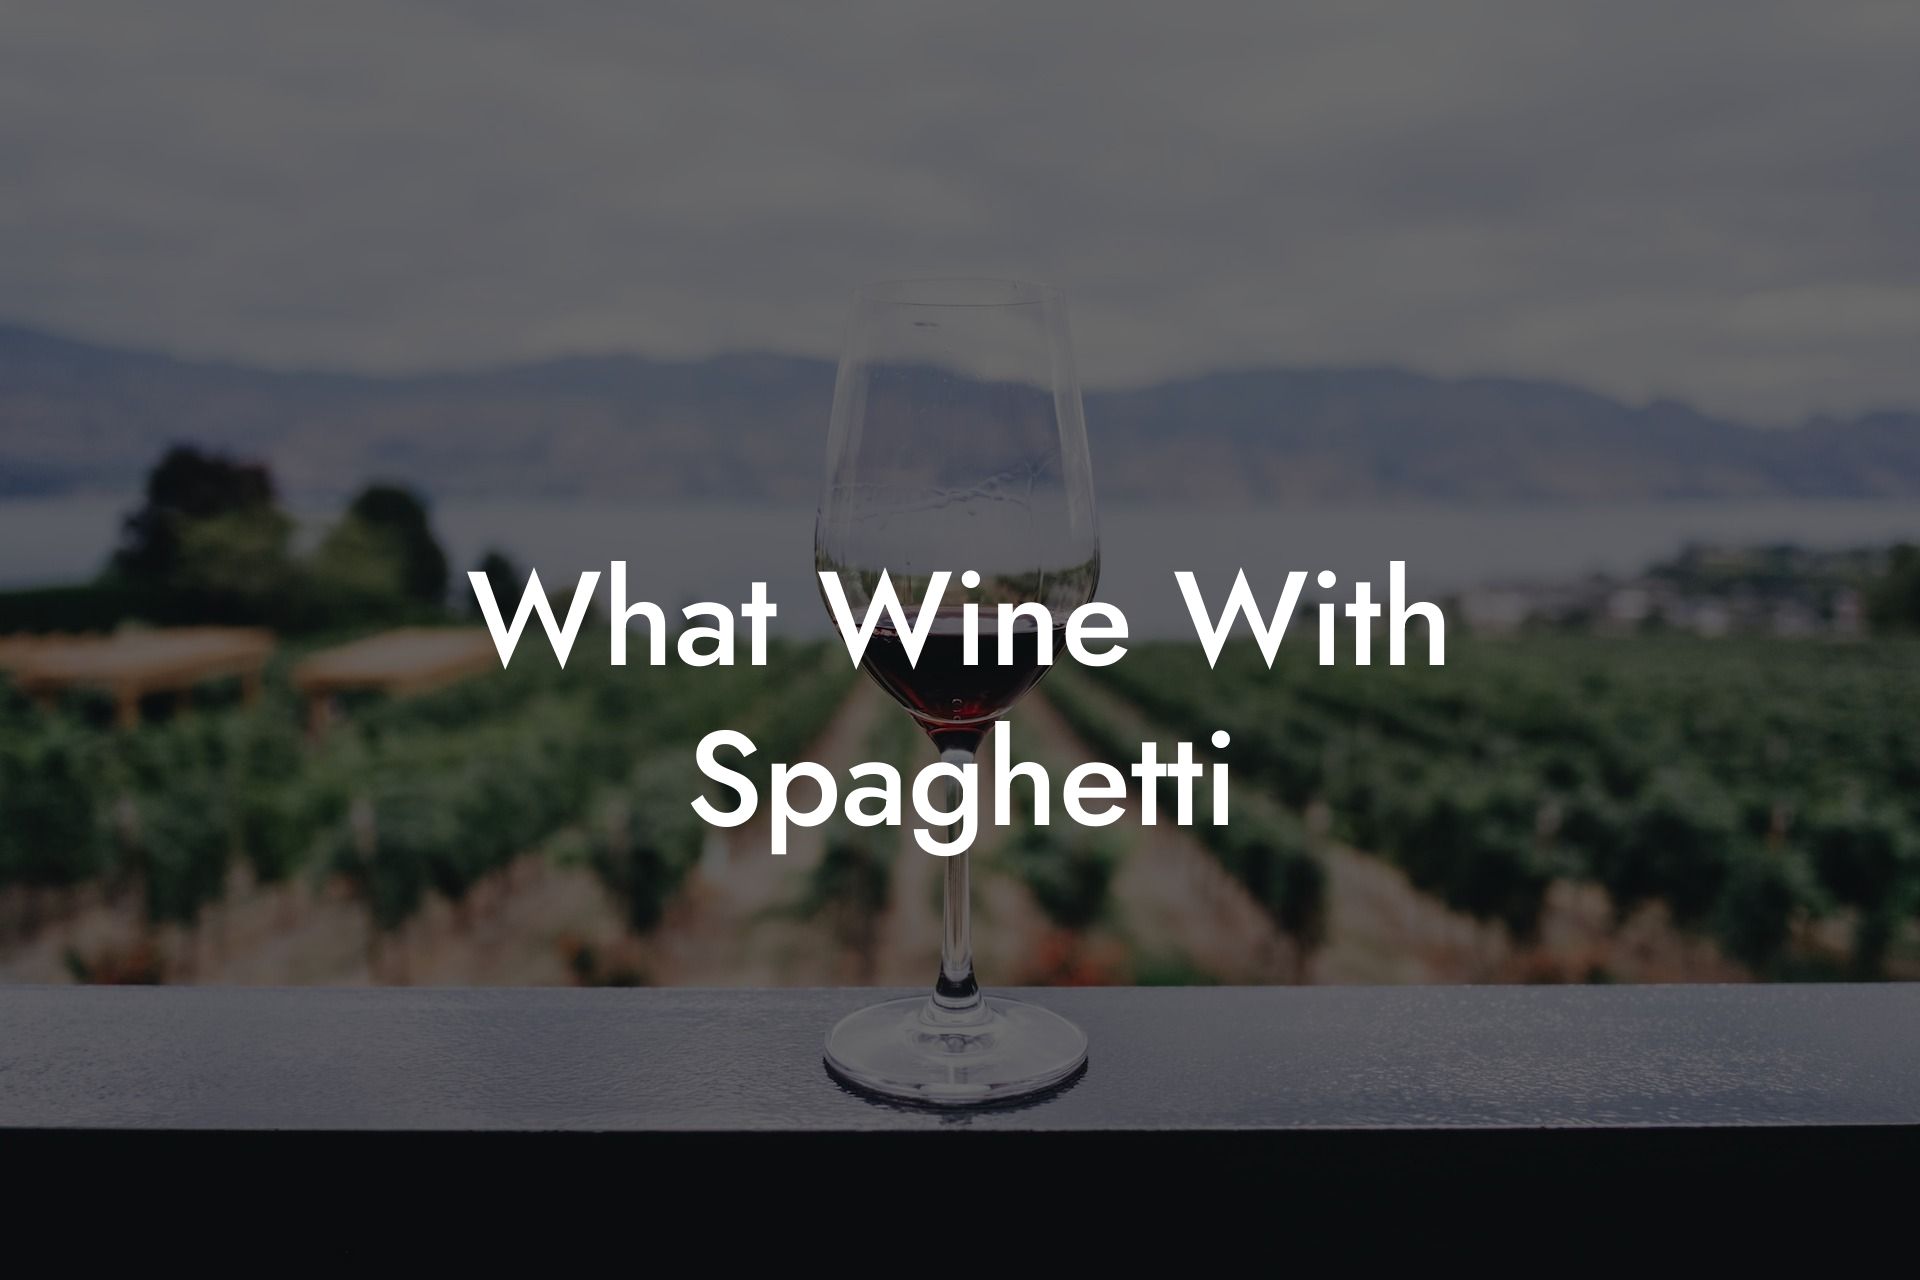 What Wine With Spaghetti